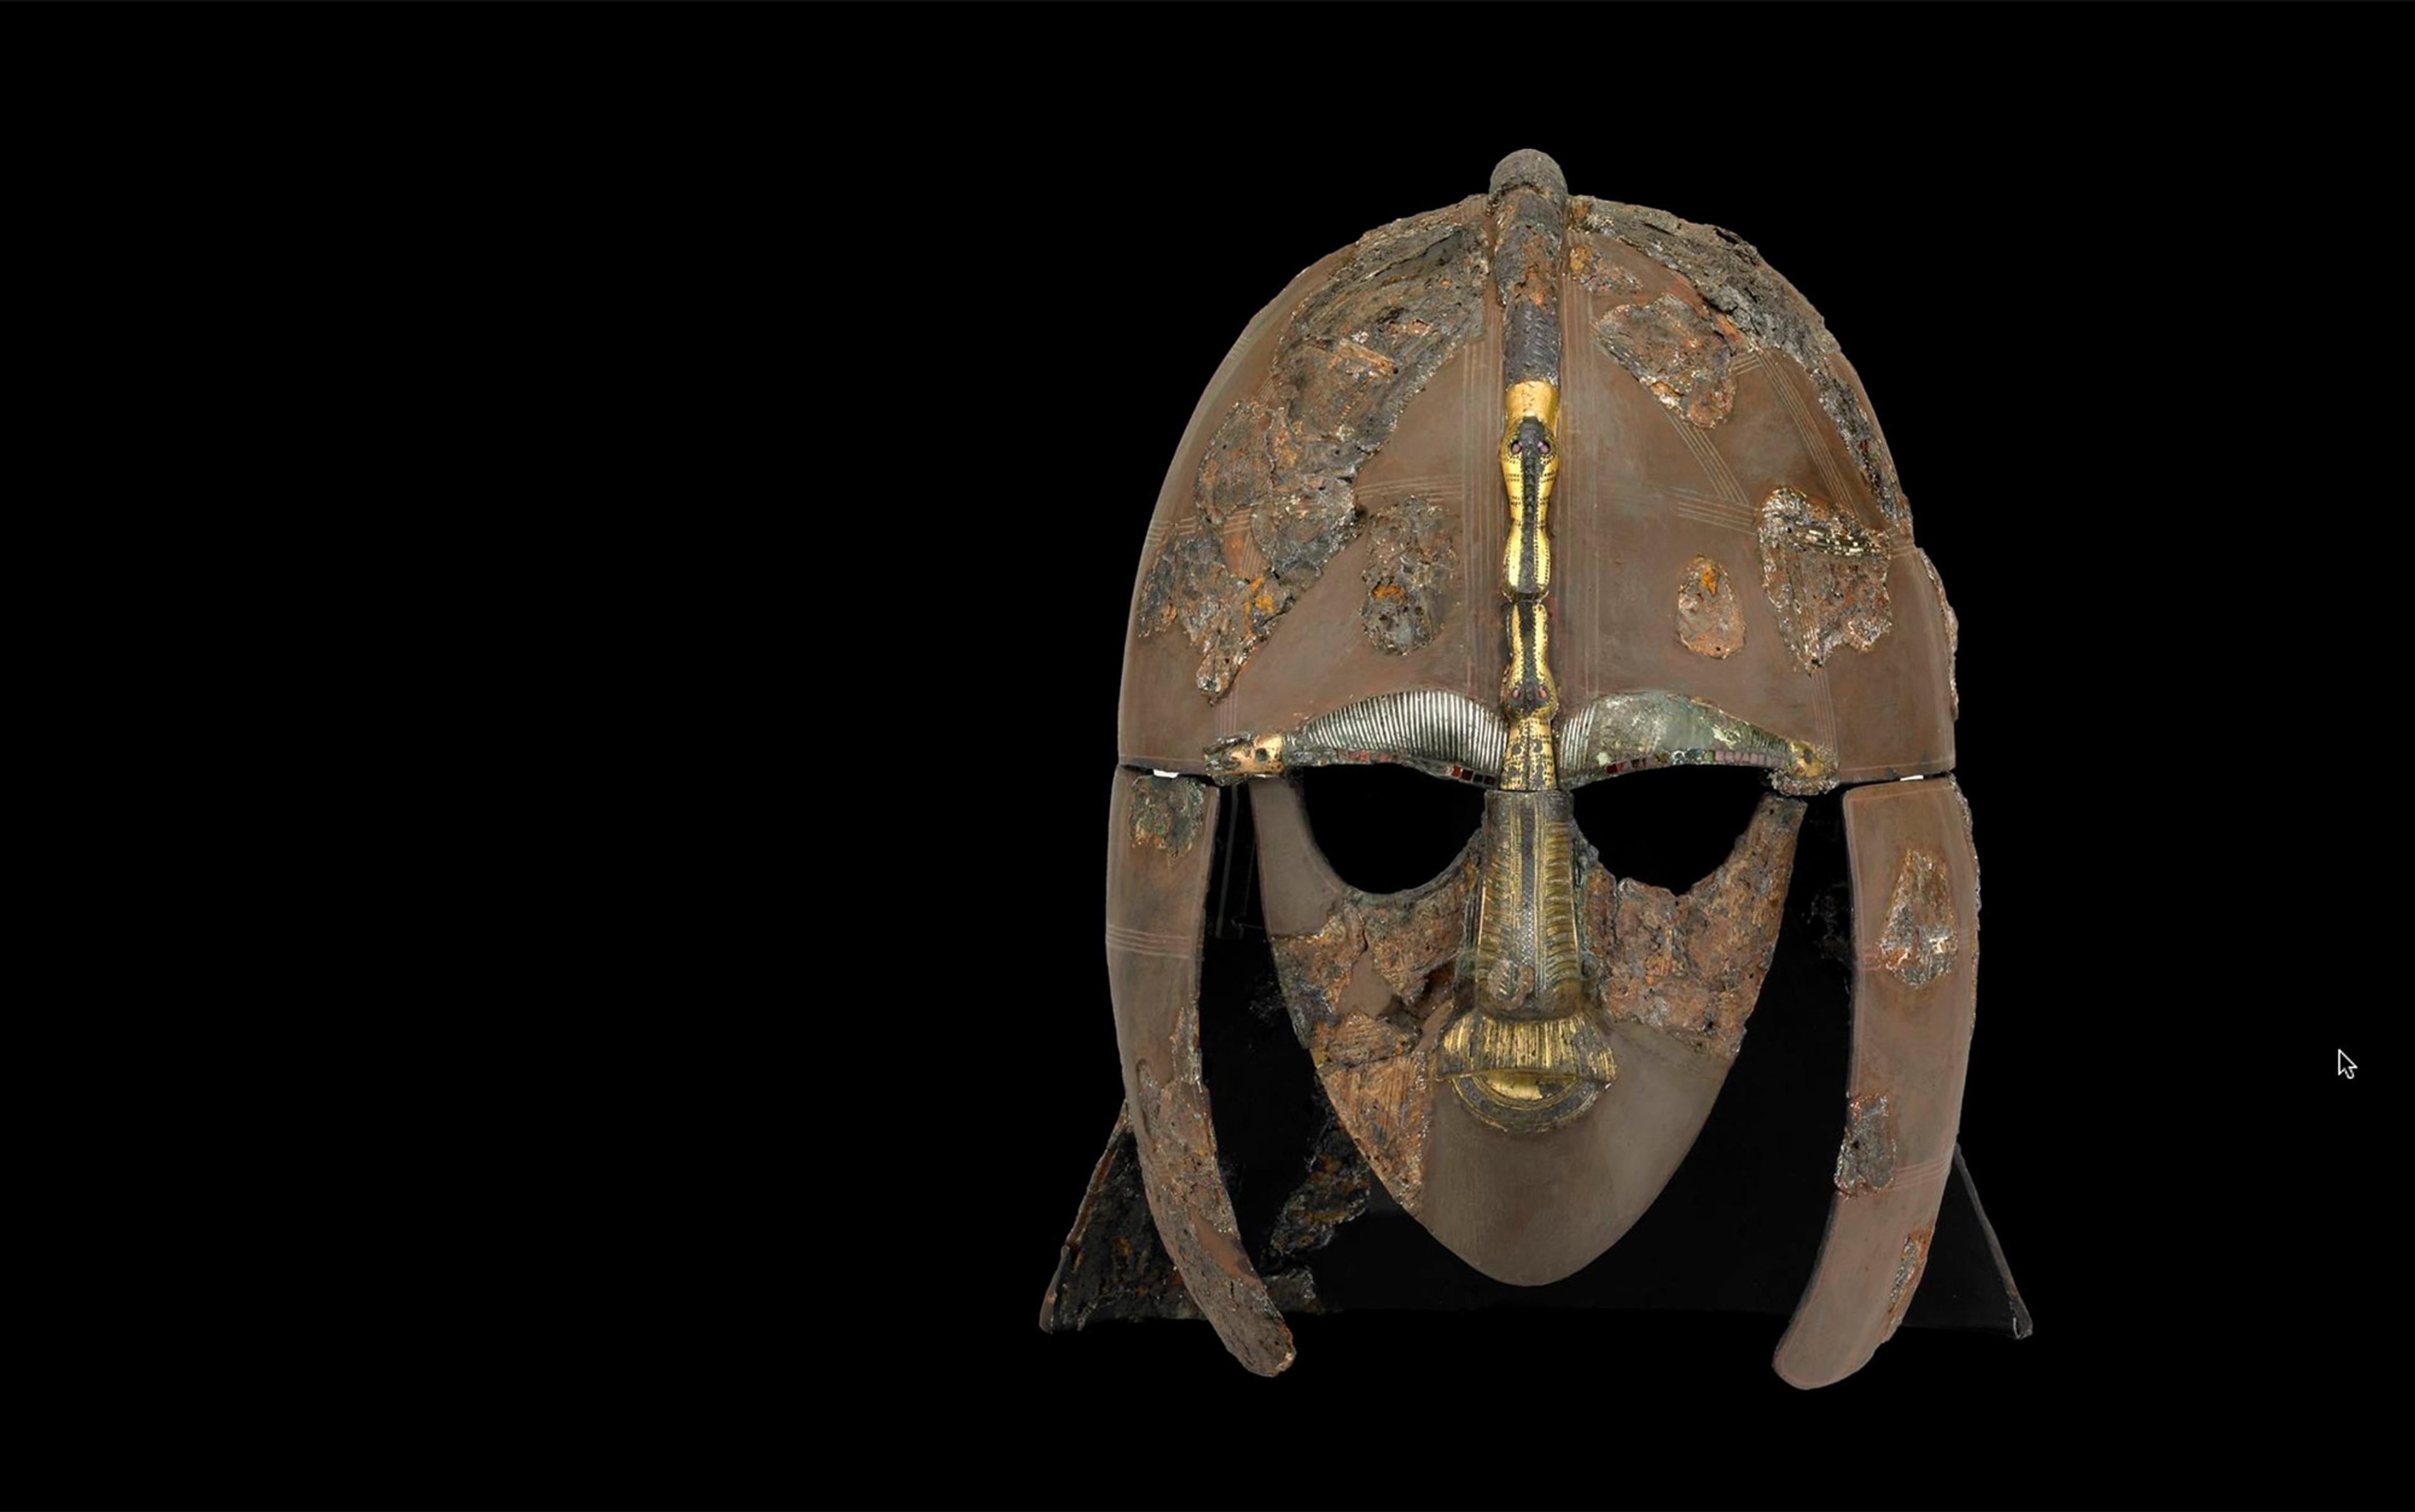 The dark side of the Anglo-Saxons